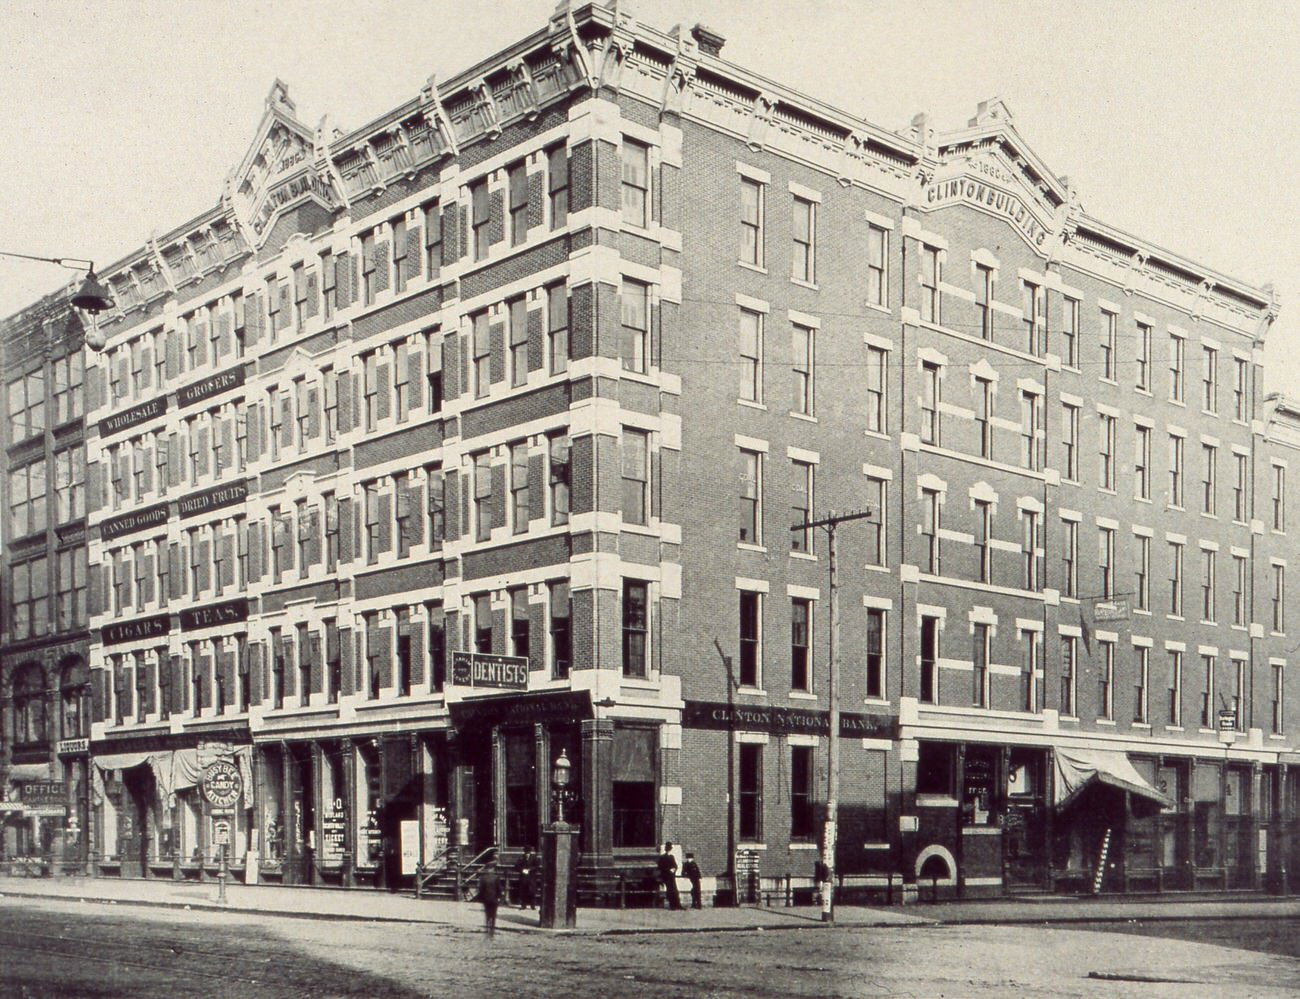 Clinton Building at the corner of Chestnut and High, 1889.